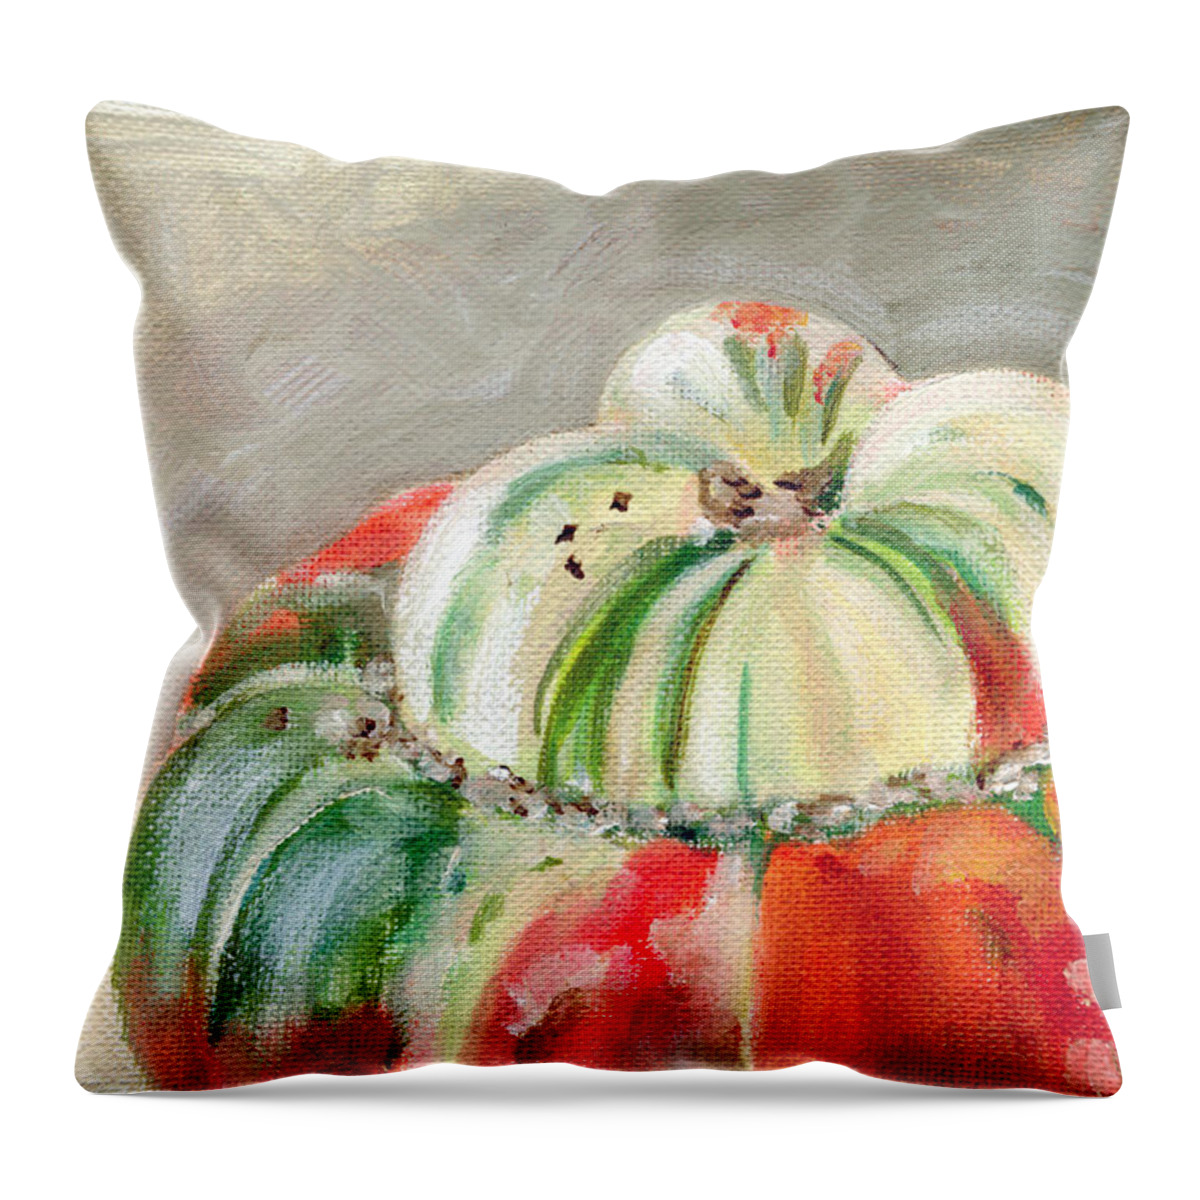 Still-life Throw Pillow featuring the painting Turks Turban by Sarah Lynch